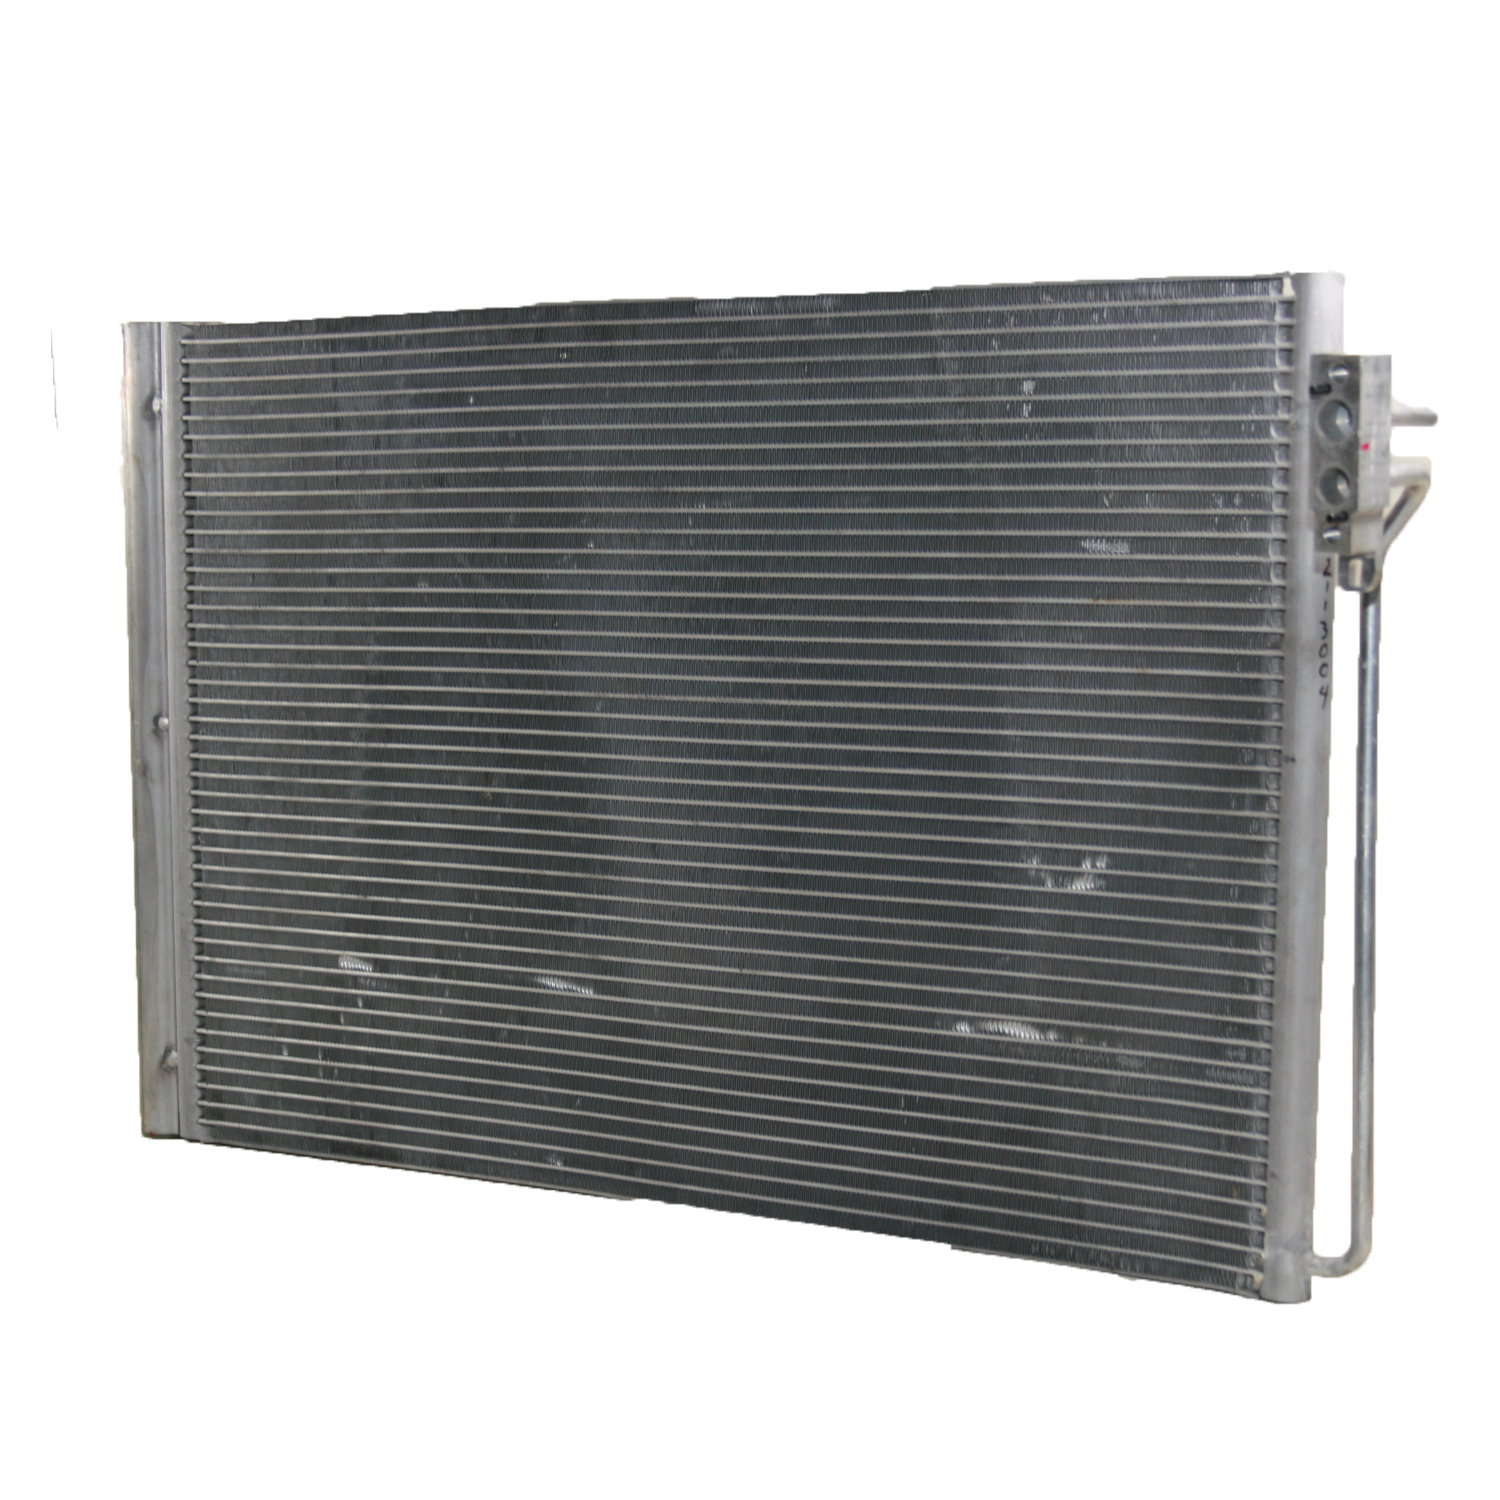 TCW Condenser 44-3422 New Product Image field_60b6a13a6e67c